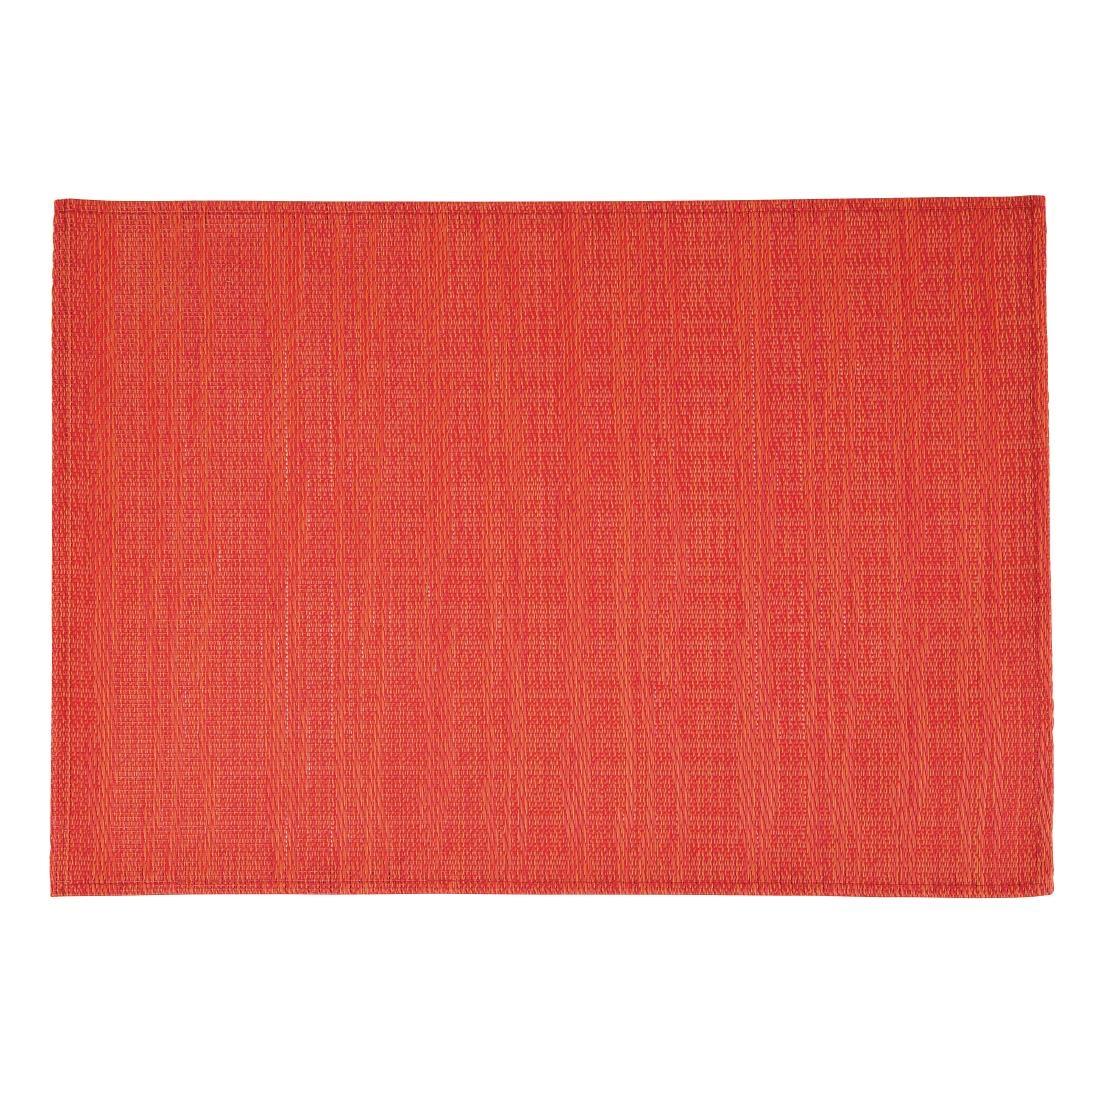 APS PVC Placemat Fine Band Red (Pack of 6) - GL612  - 1